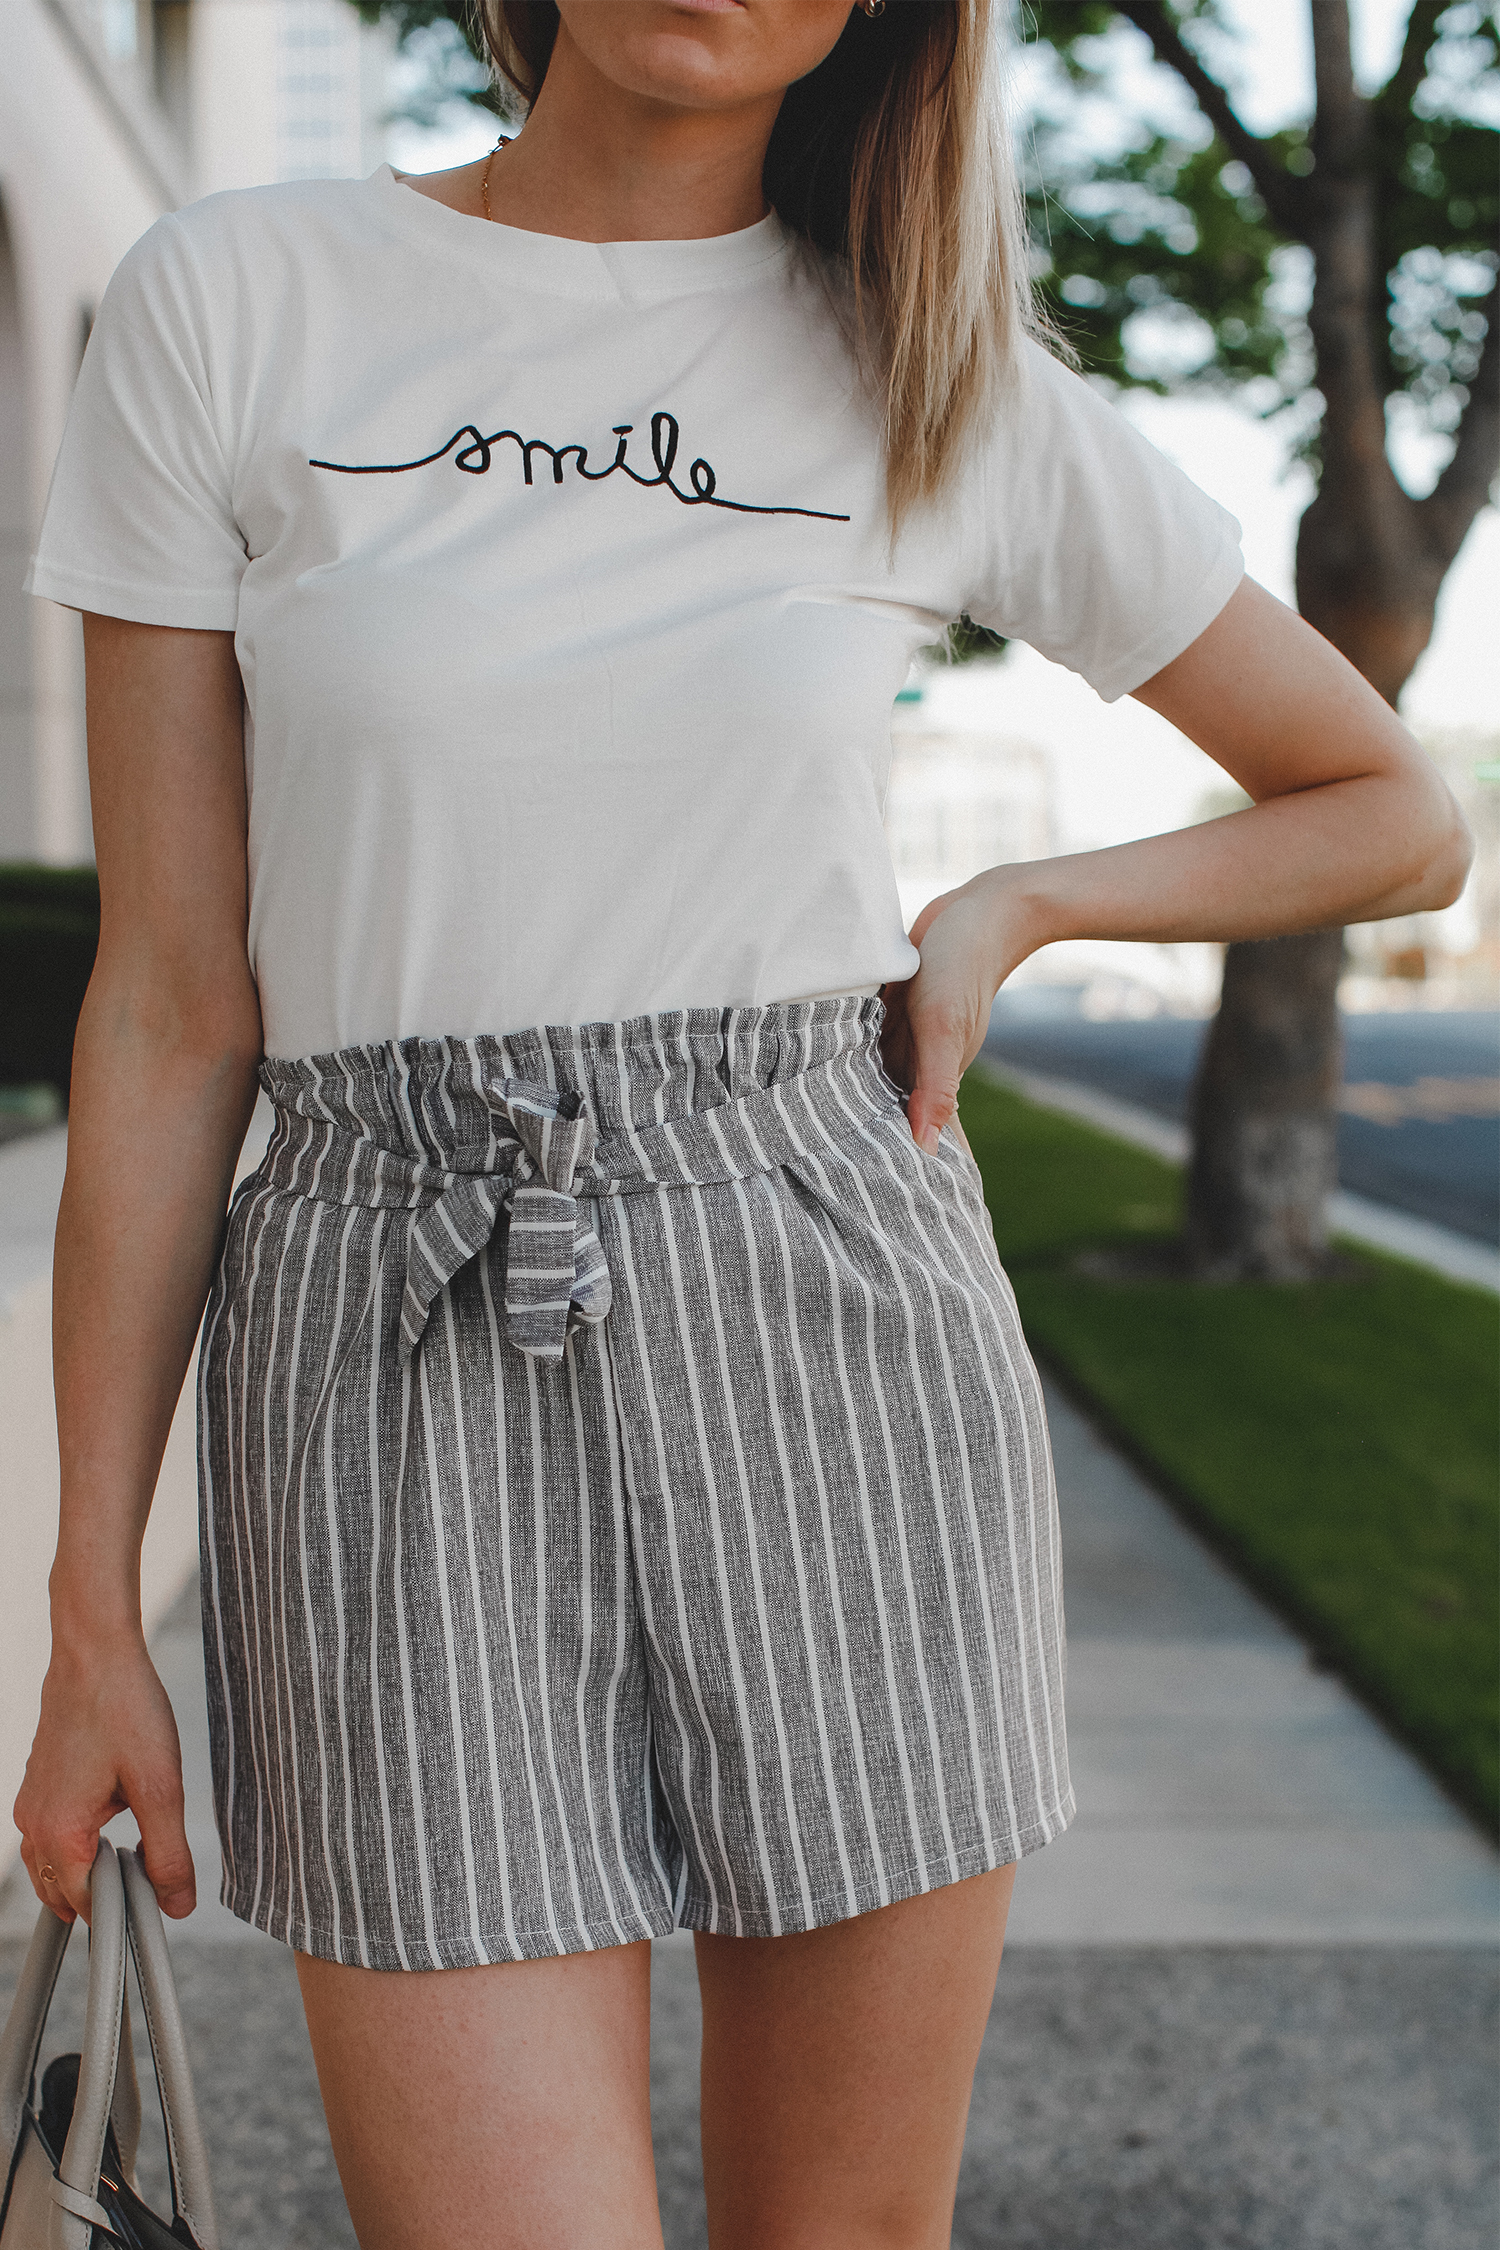 Paper bag shorts trend featured by top US fashion blog, Tea Cups & Tulips: image of a woman wearing Light grey paper bag shorts and a smile tee